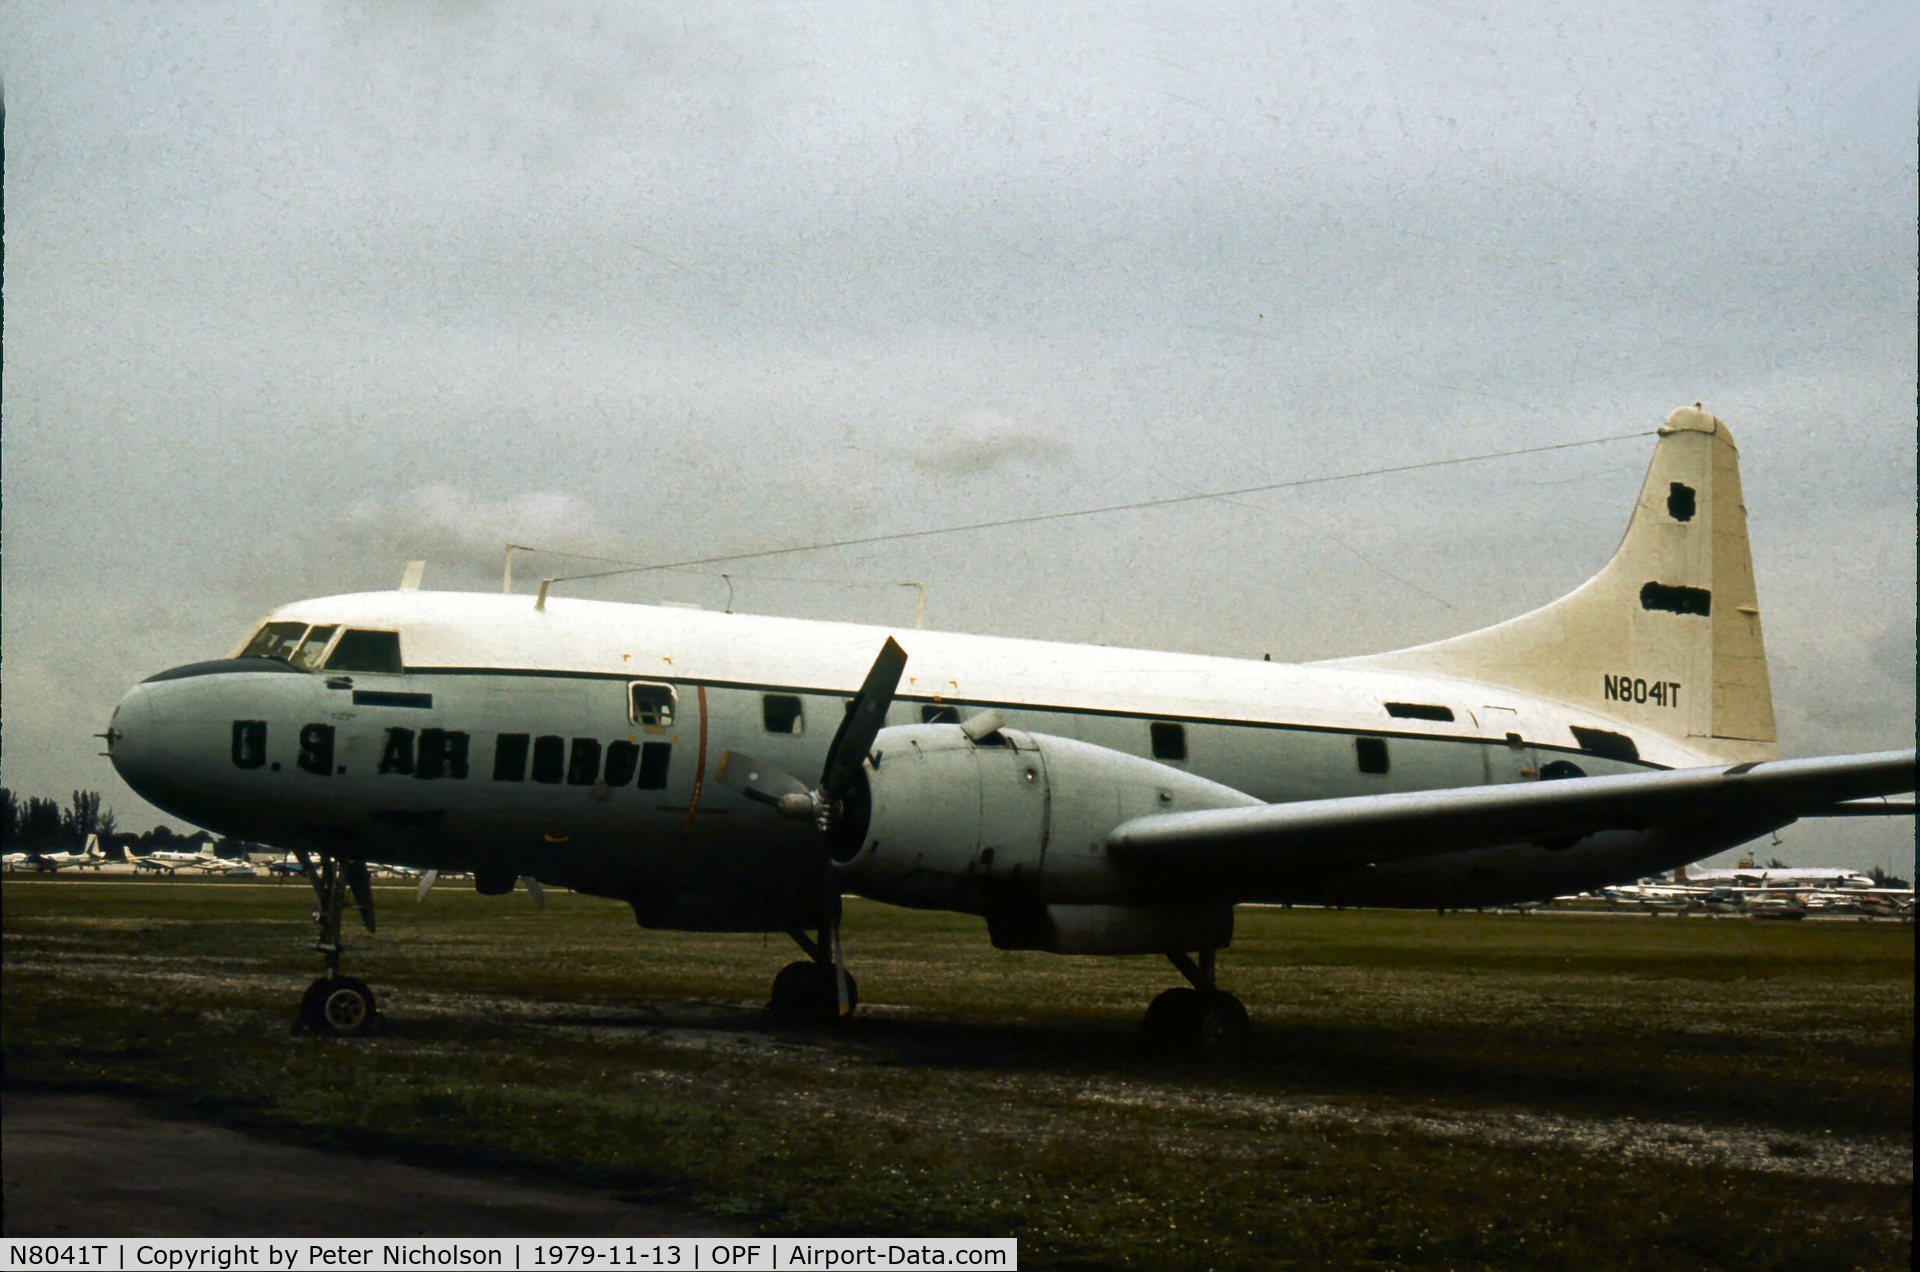 N8041T, 1953 General Dynamics Corp. 240 C/N 52-39, This ex USAF VT-29D 52-9979 was parked at Opa-Locka in 1979.